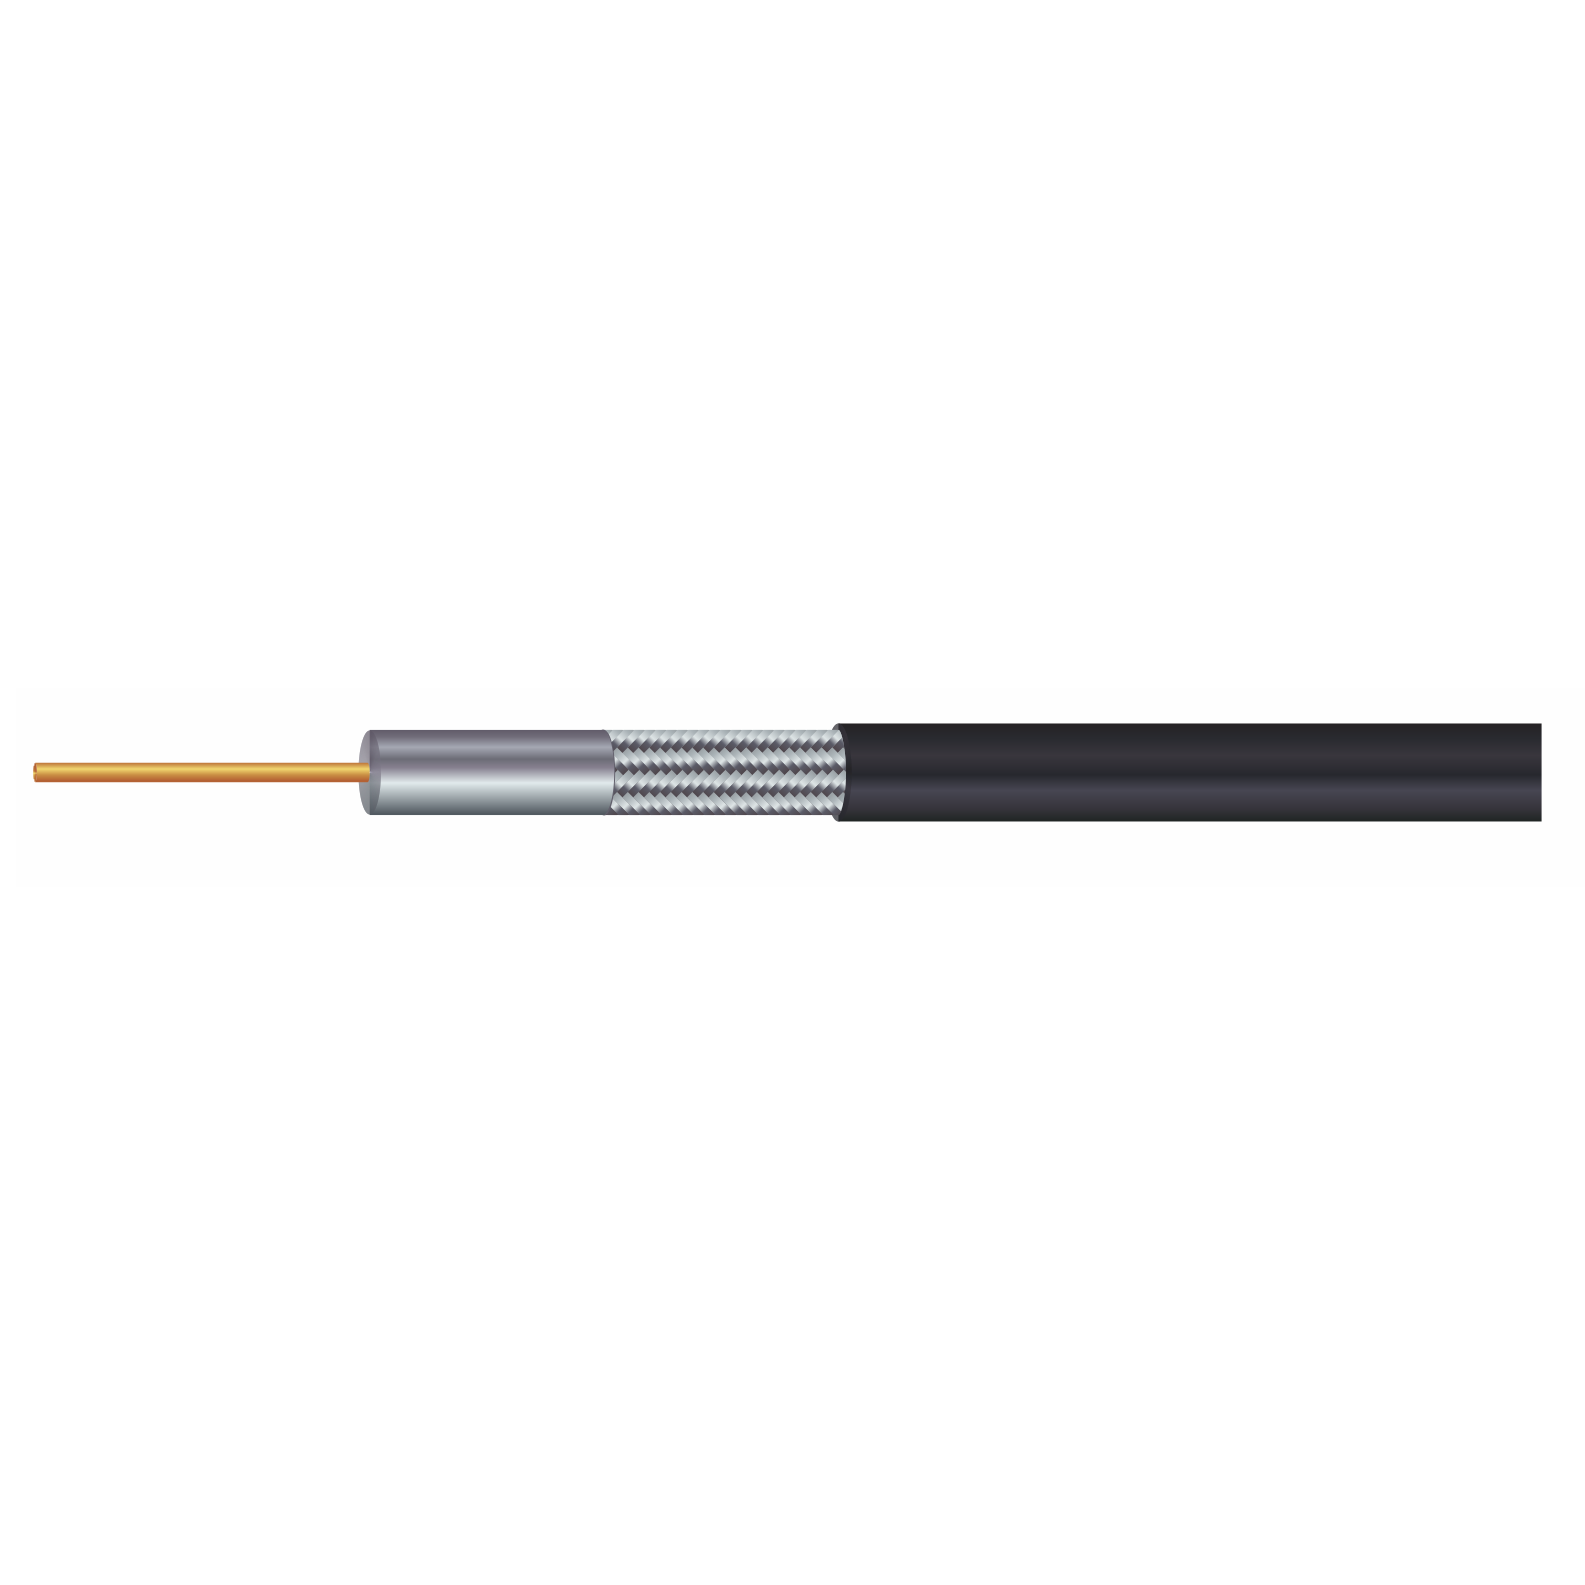 RG59 Coaxial Cable